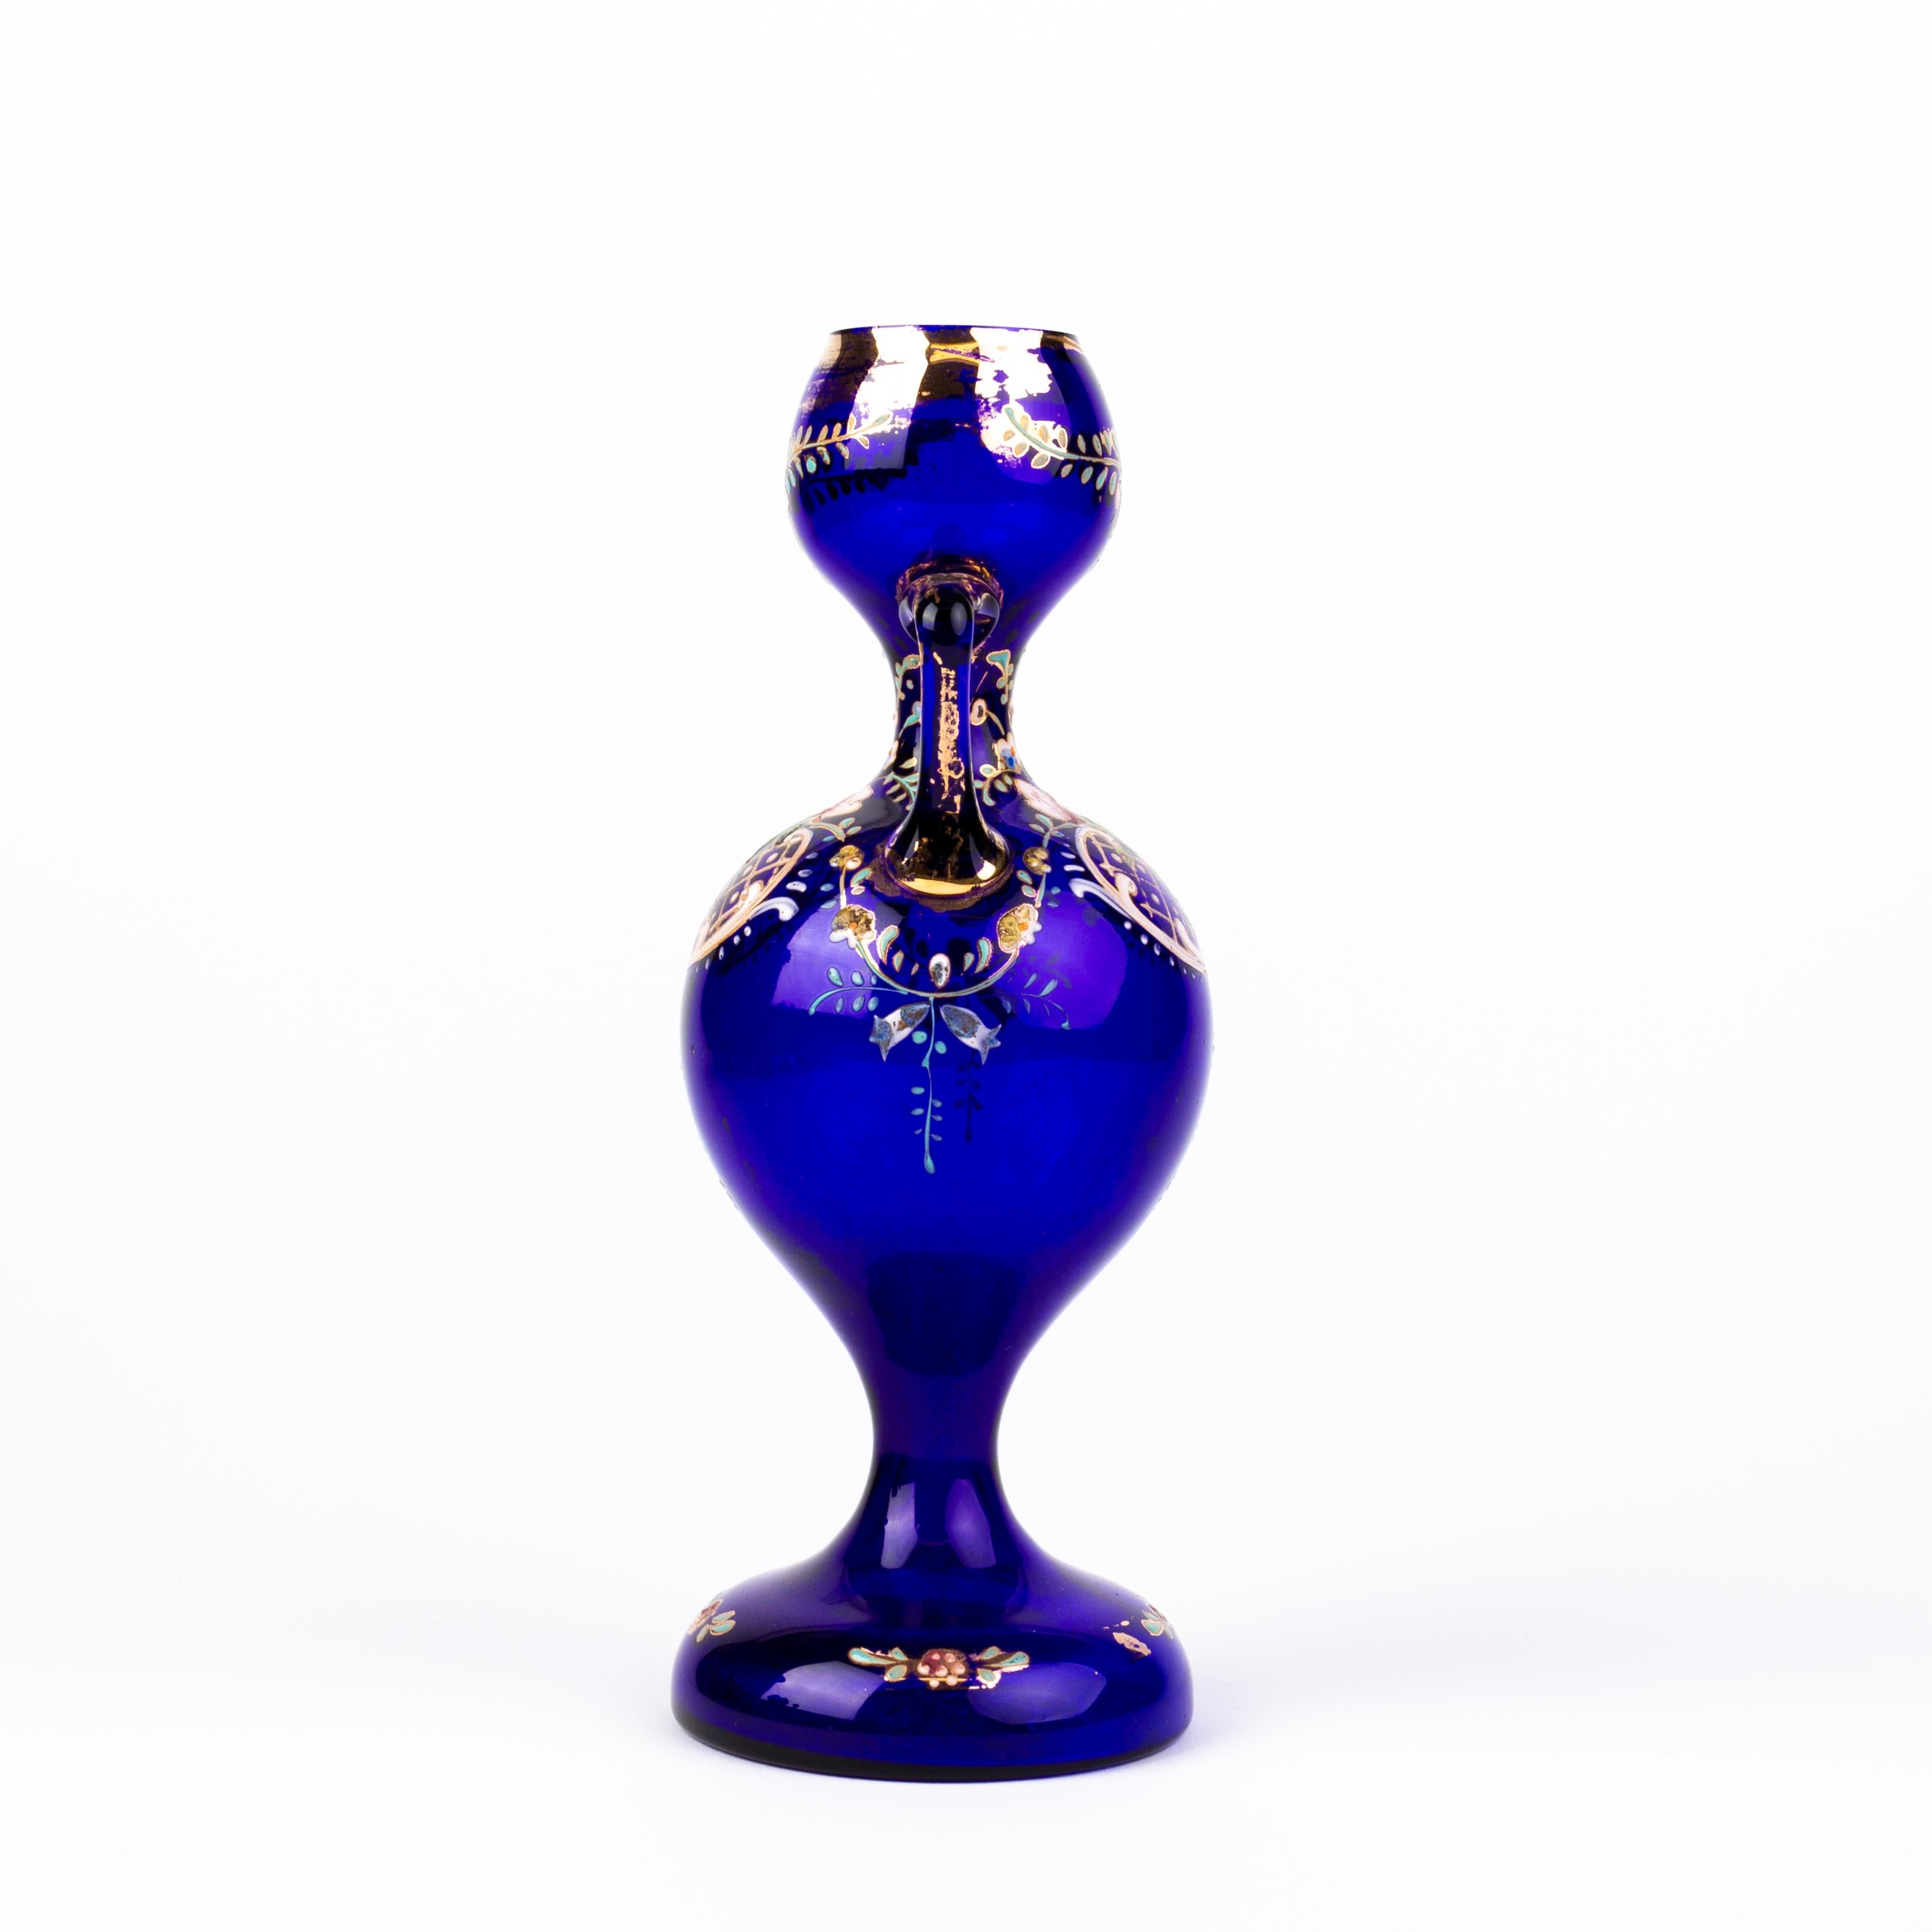 In good condition
From a private collection
Bristol Blue Enamel Painted Glass Art Nouveau Vase